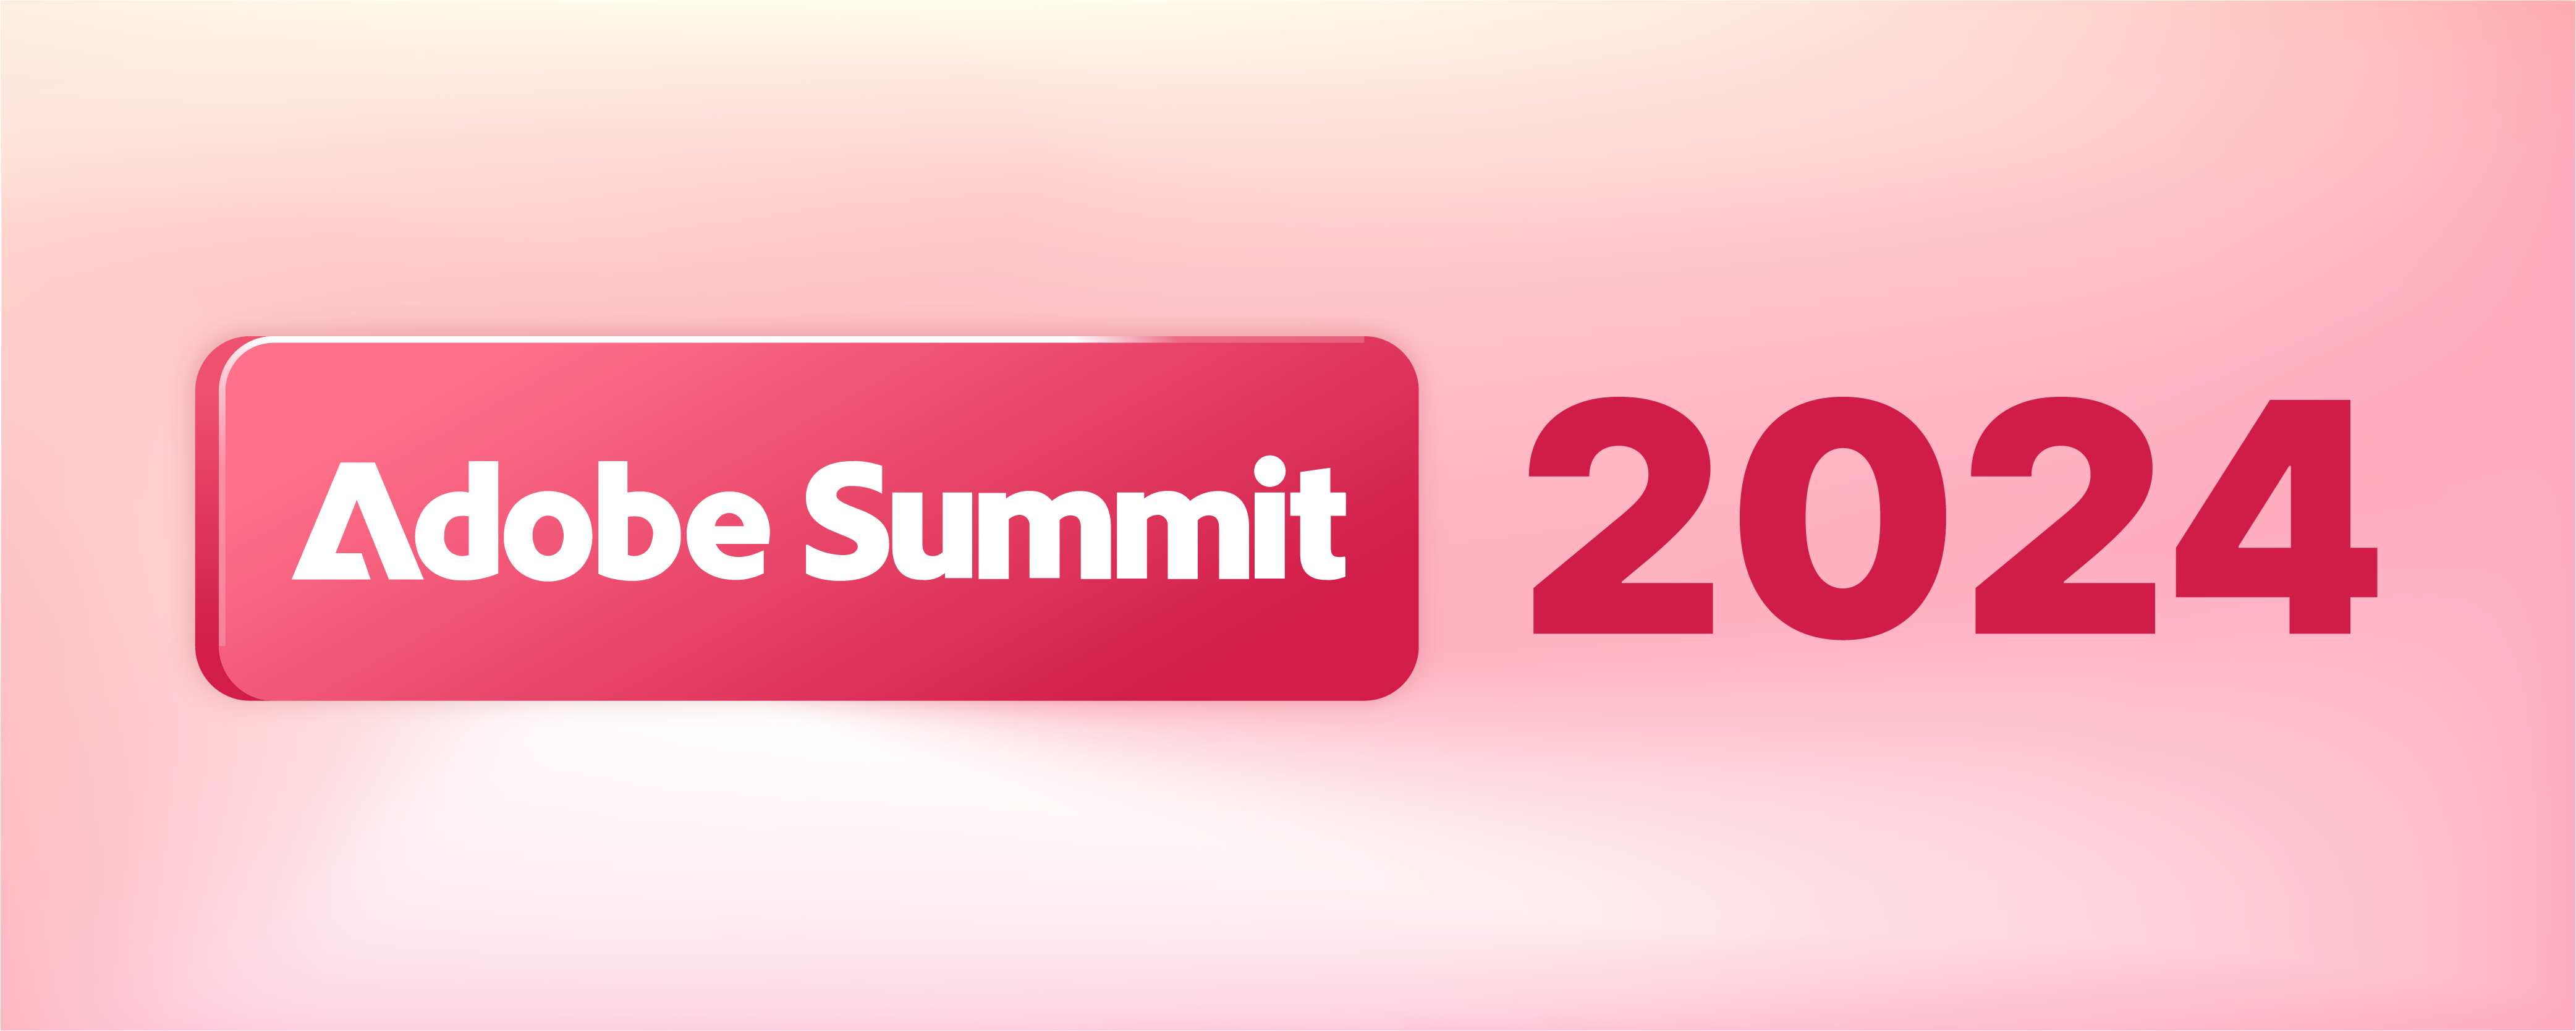 Adobe Summit 2024: What to Expect at Magento Conference in Las Vegas?